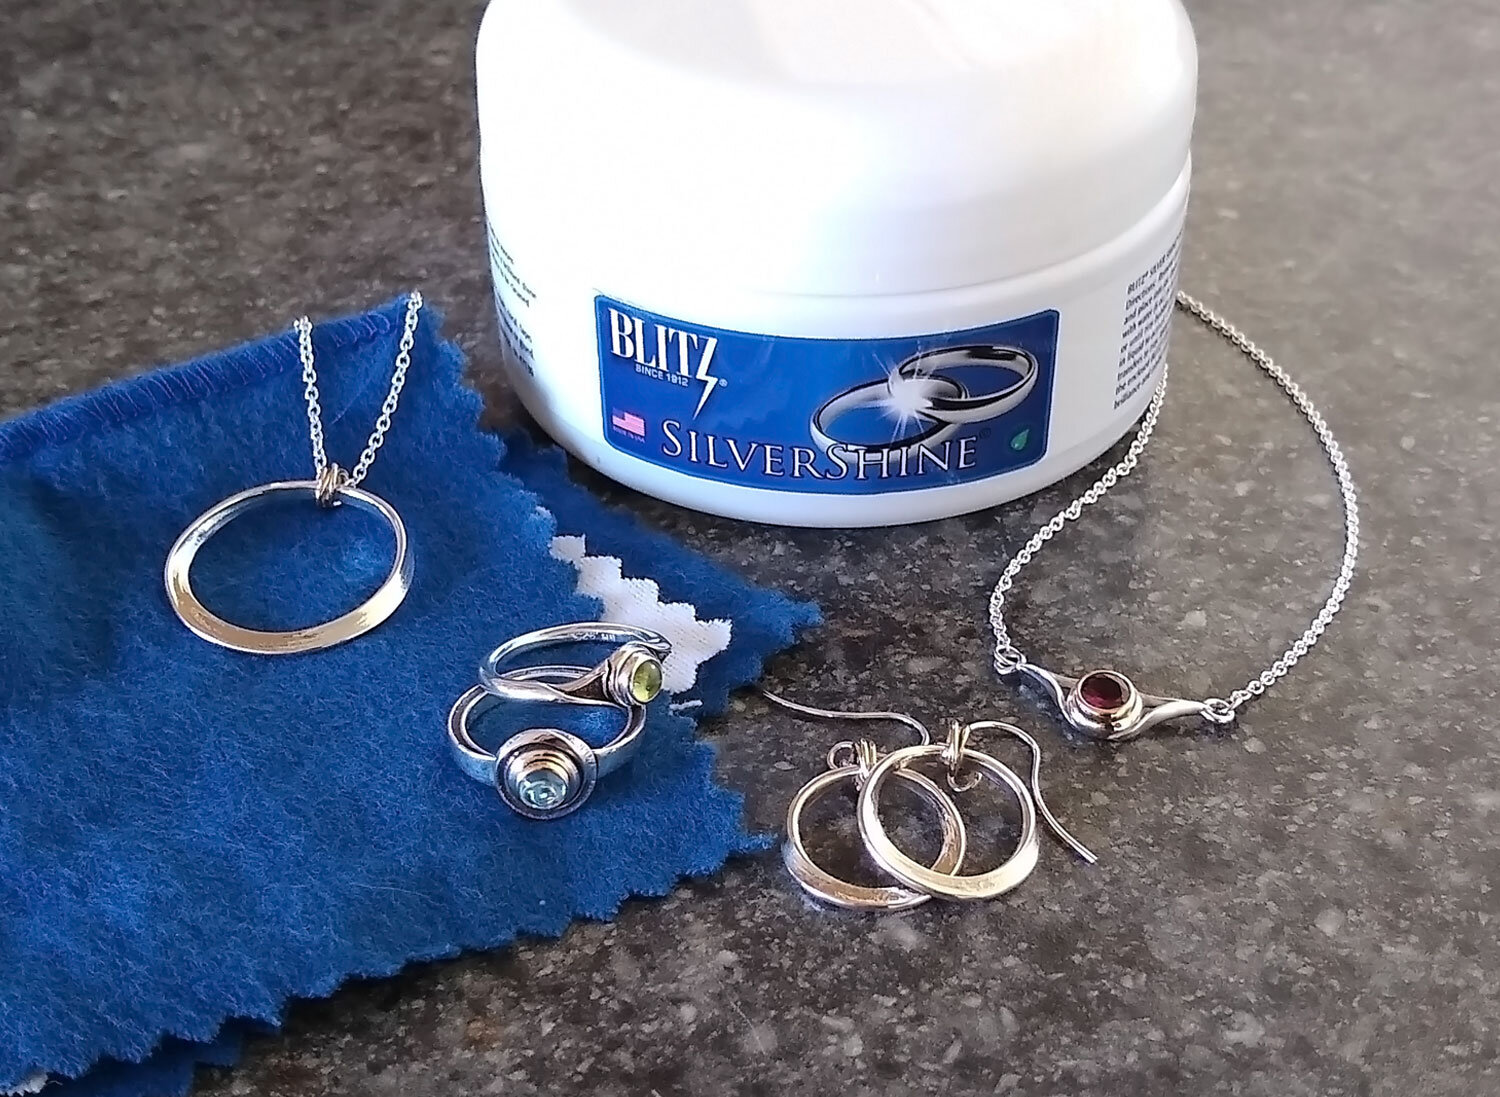 What IS the best way to clean jewelry? — Narrow House Metals